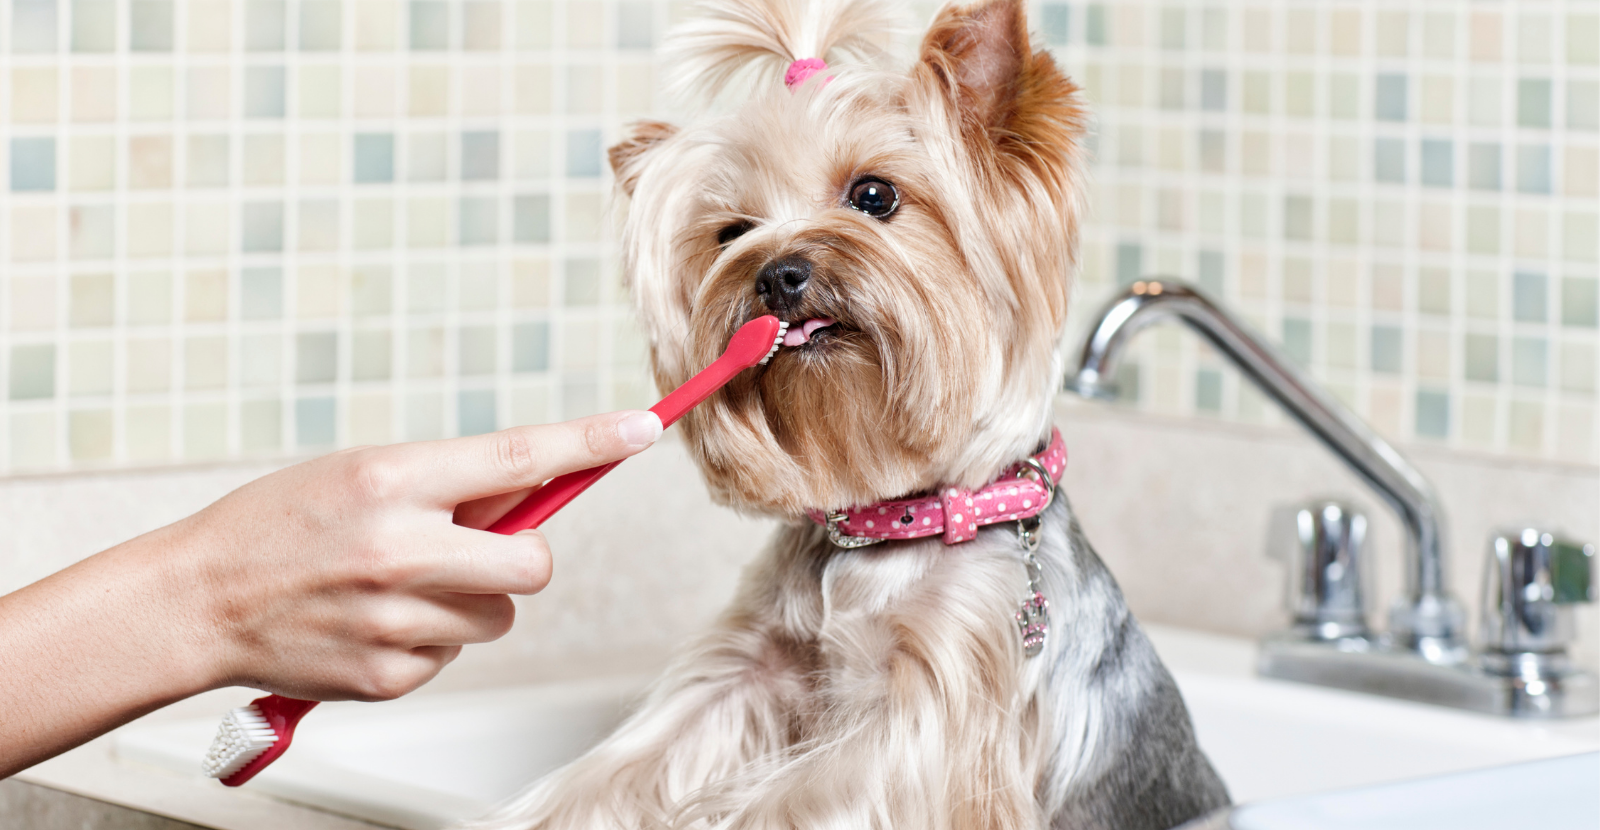 Clean your dog's teeth!